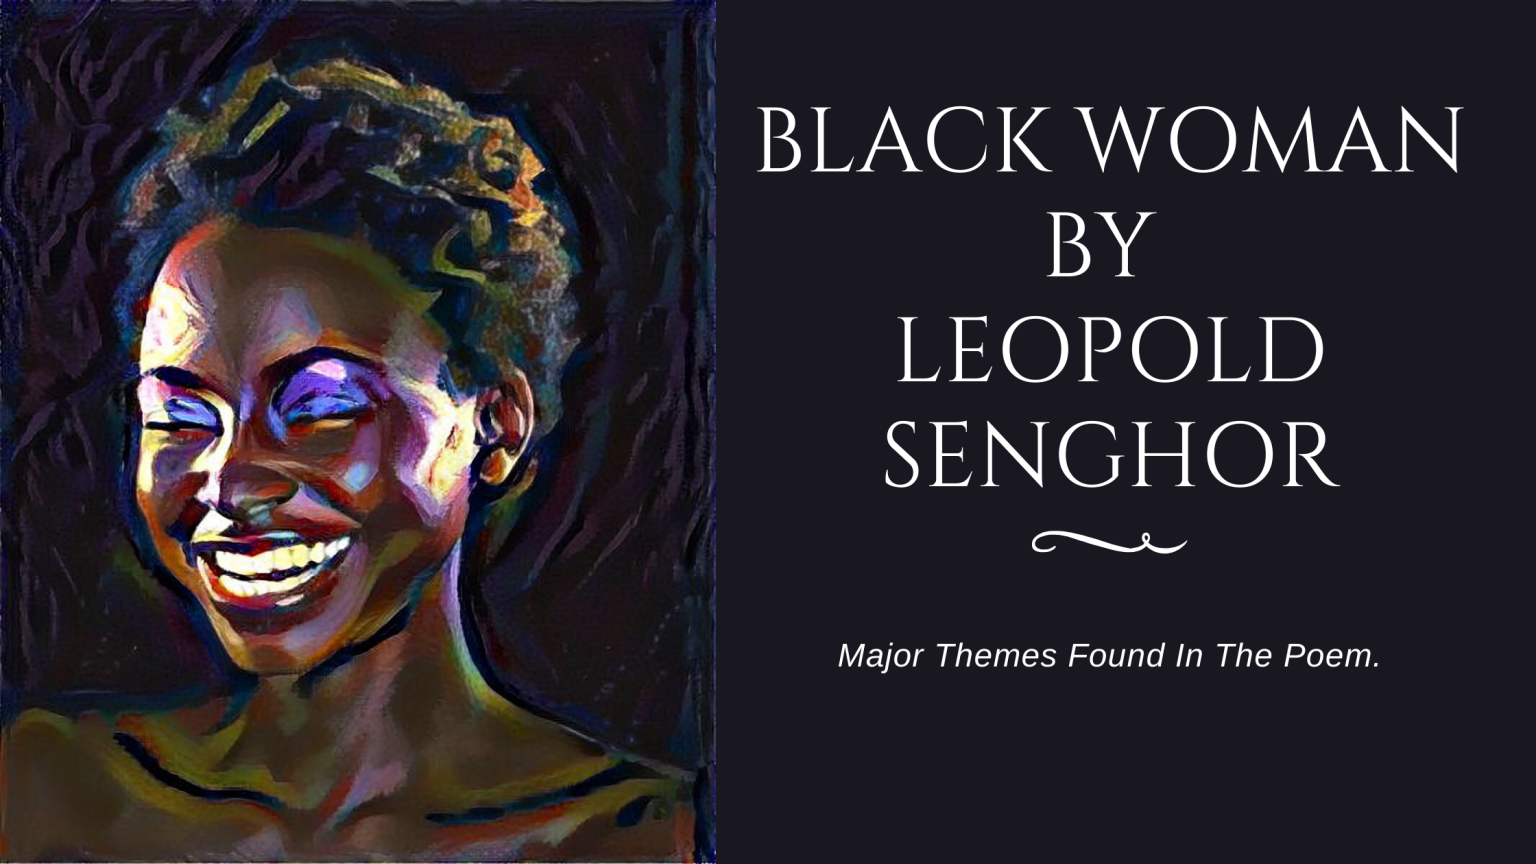 Themes of Black Woman by Leopold Senghor